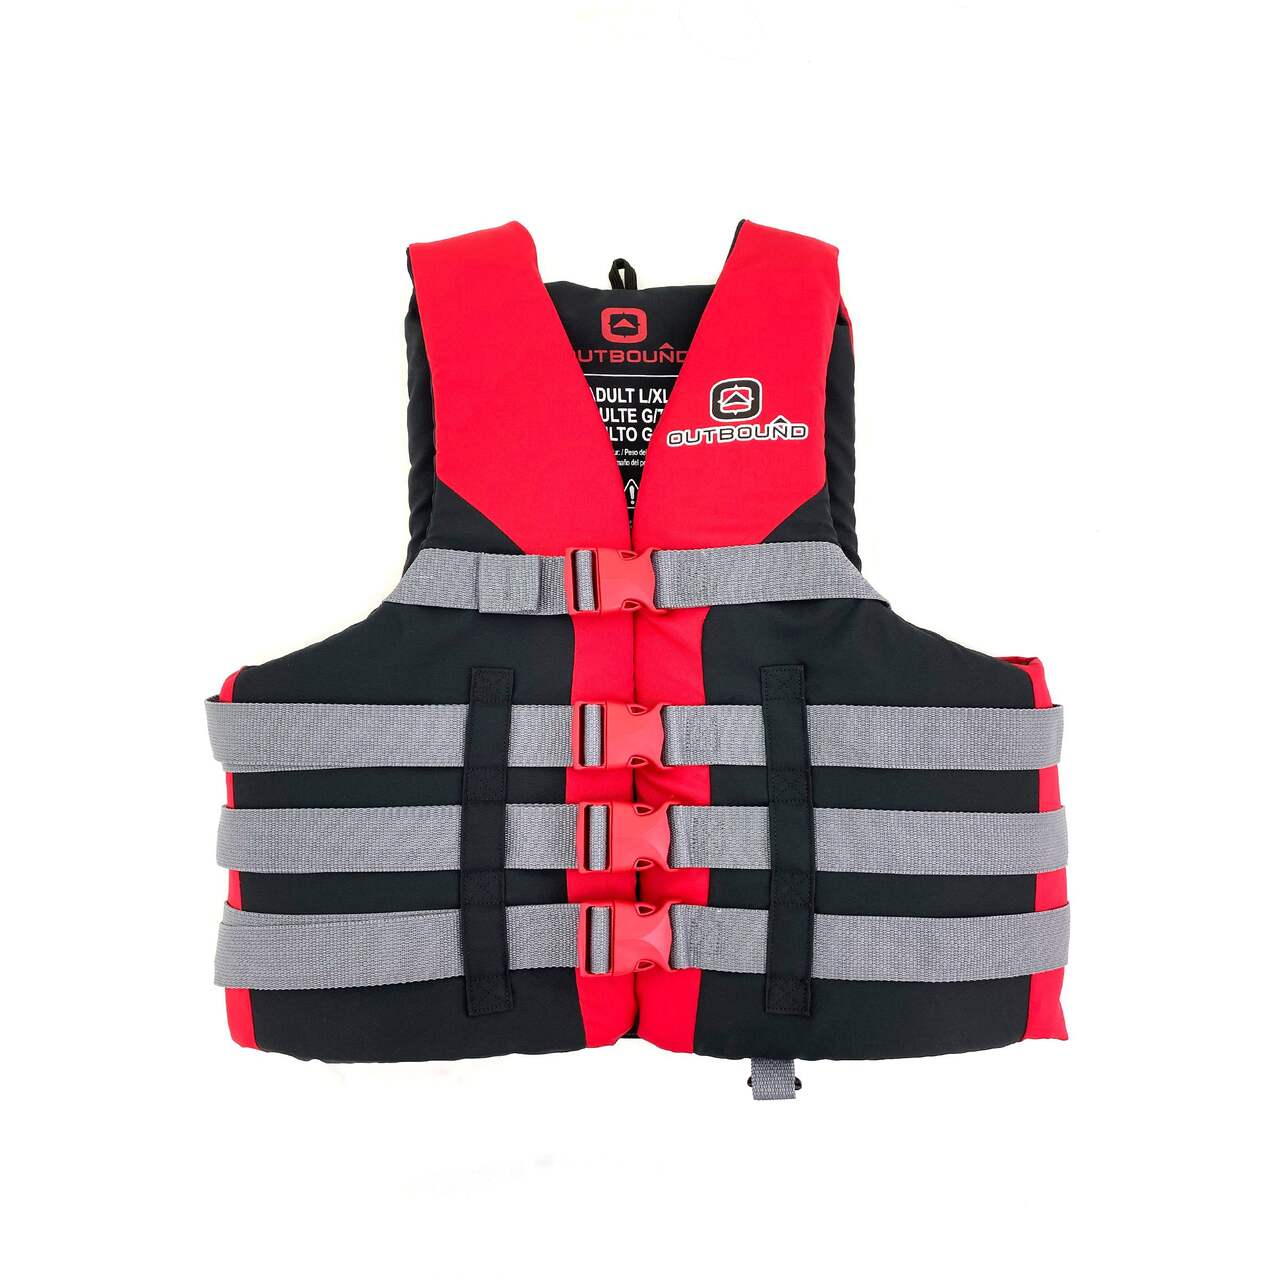 Outbound Adult 4-Buckle PFD/Life Jacket, Assorted Sizes